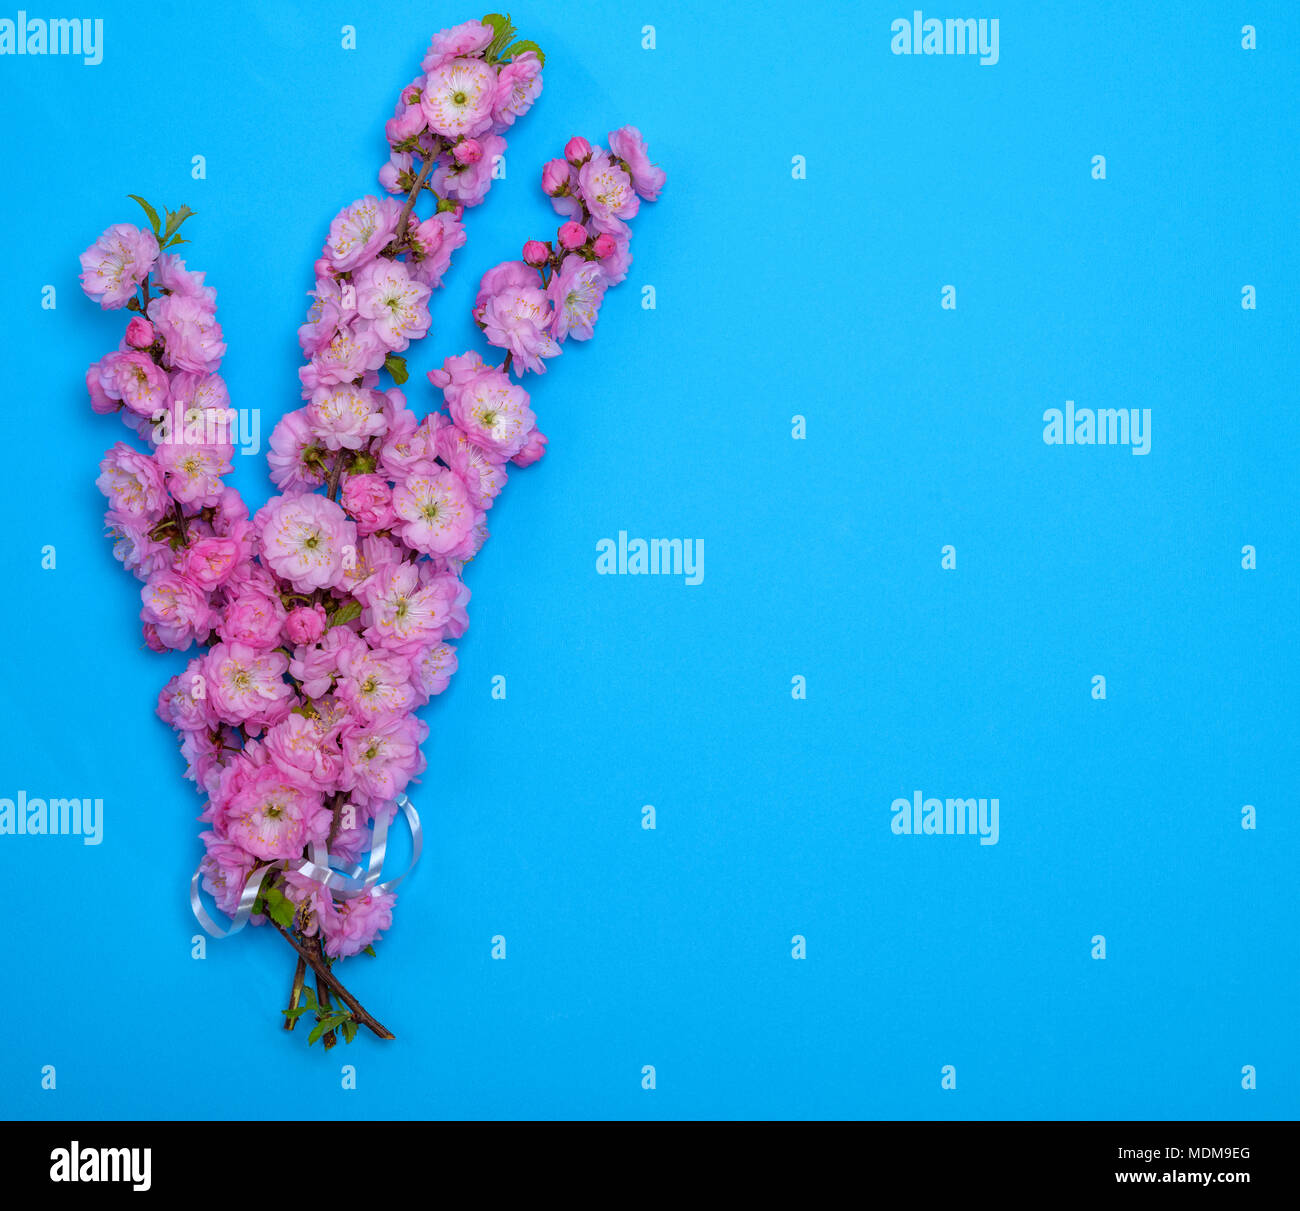 branches with pink flowers Louiseania triloba on a blue background, empty space on the right Stock Photo